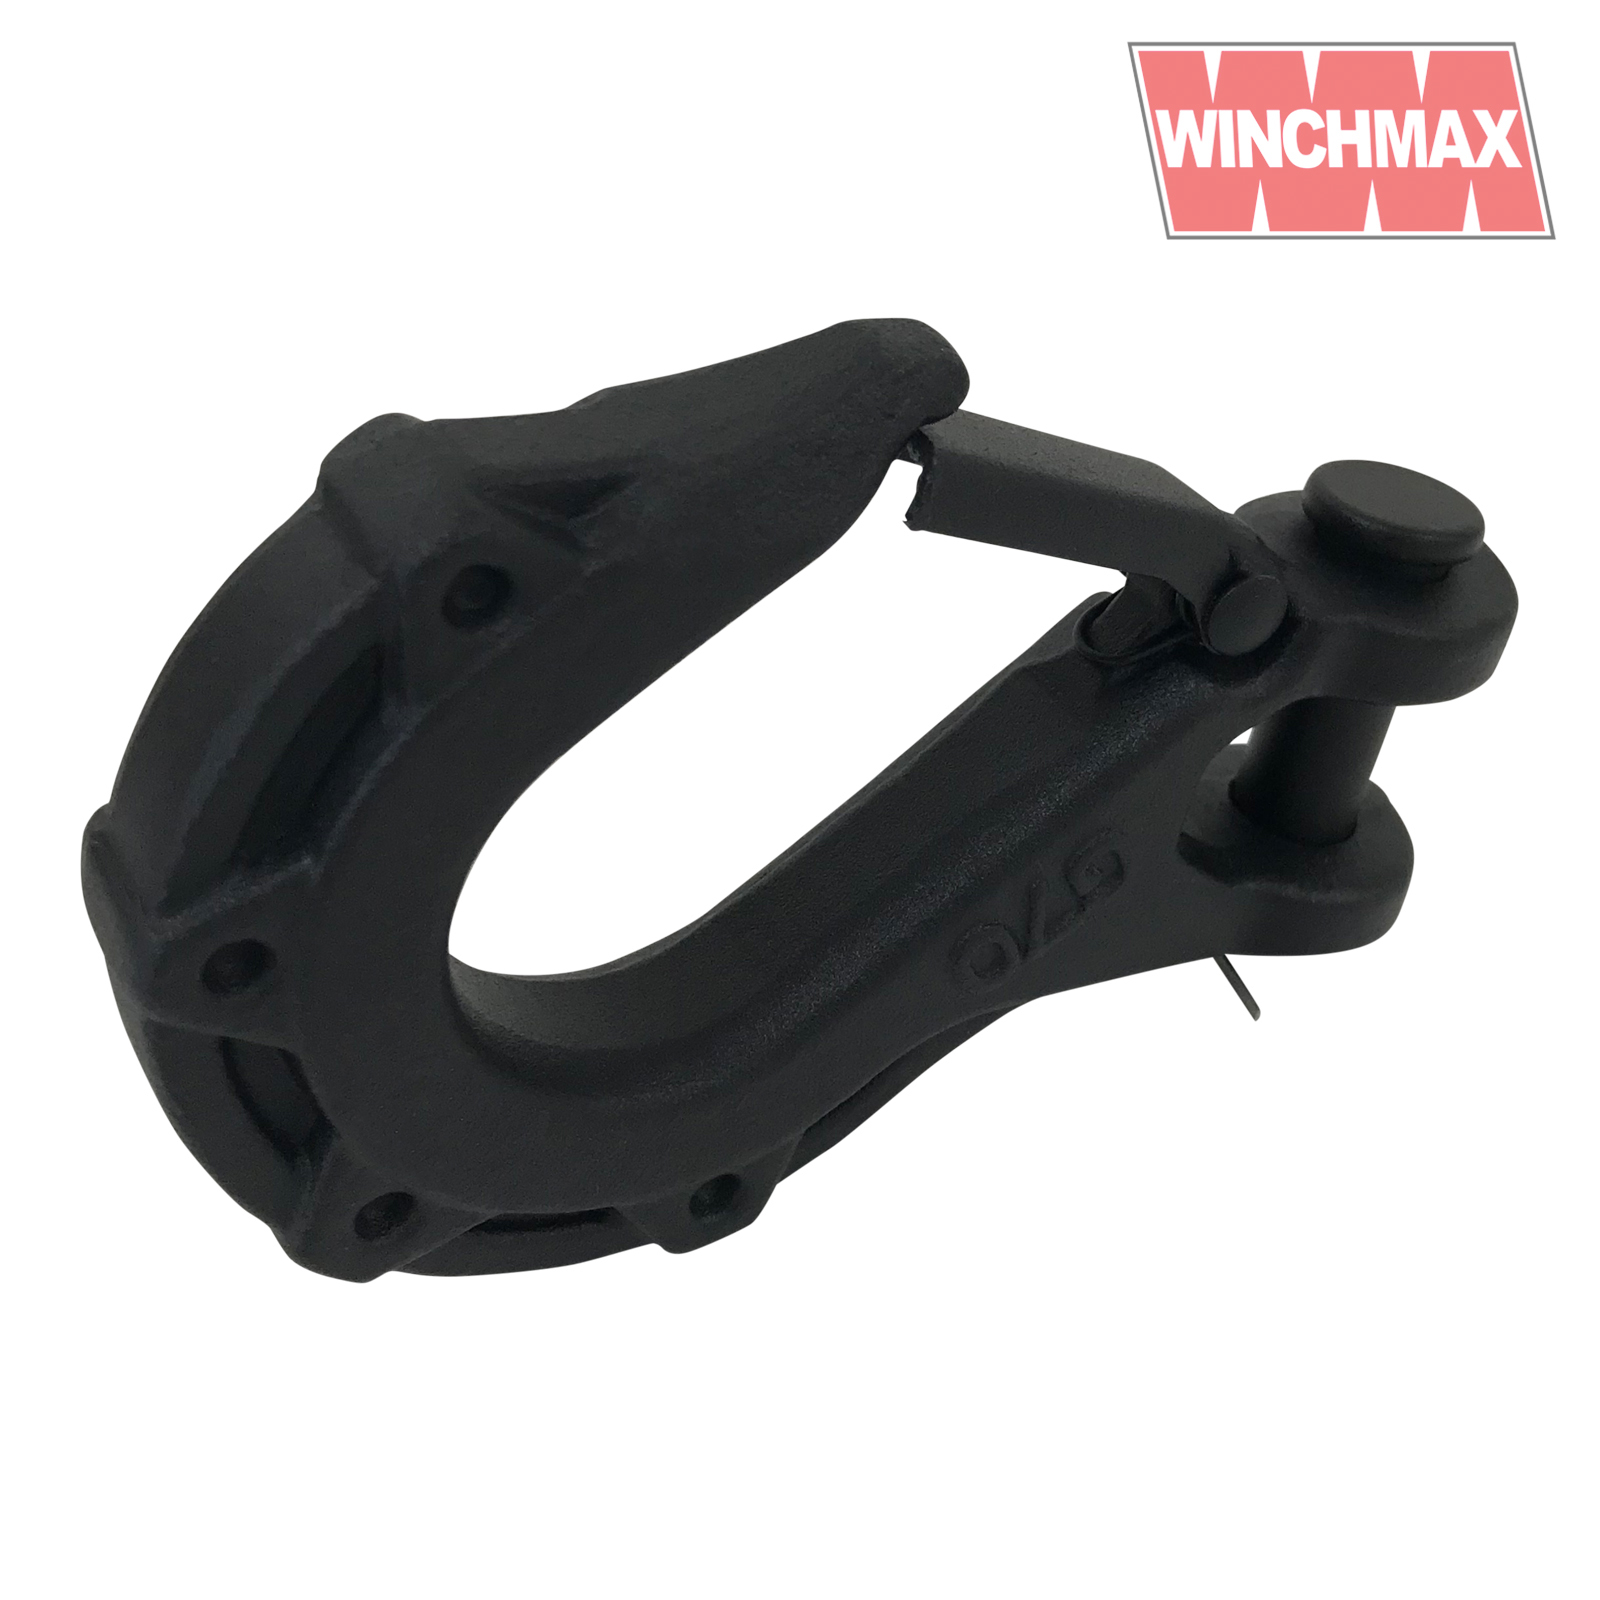 Winchmax 3/8 Inch Tactical Clevis Hook